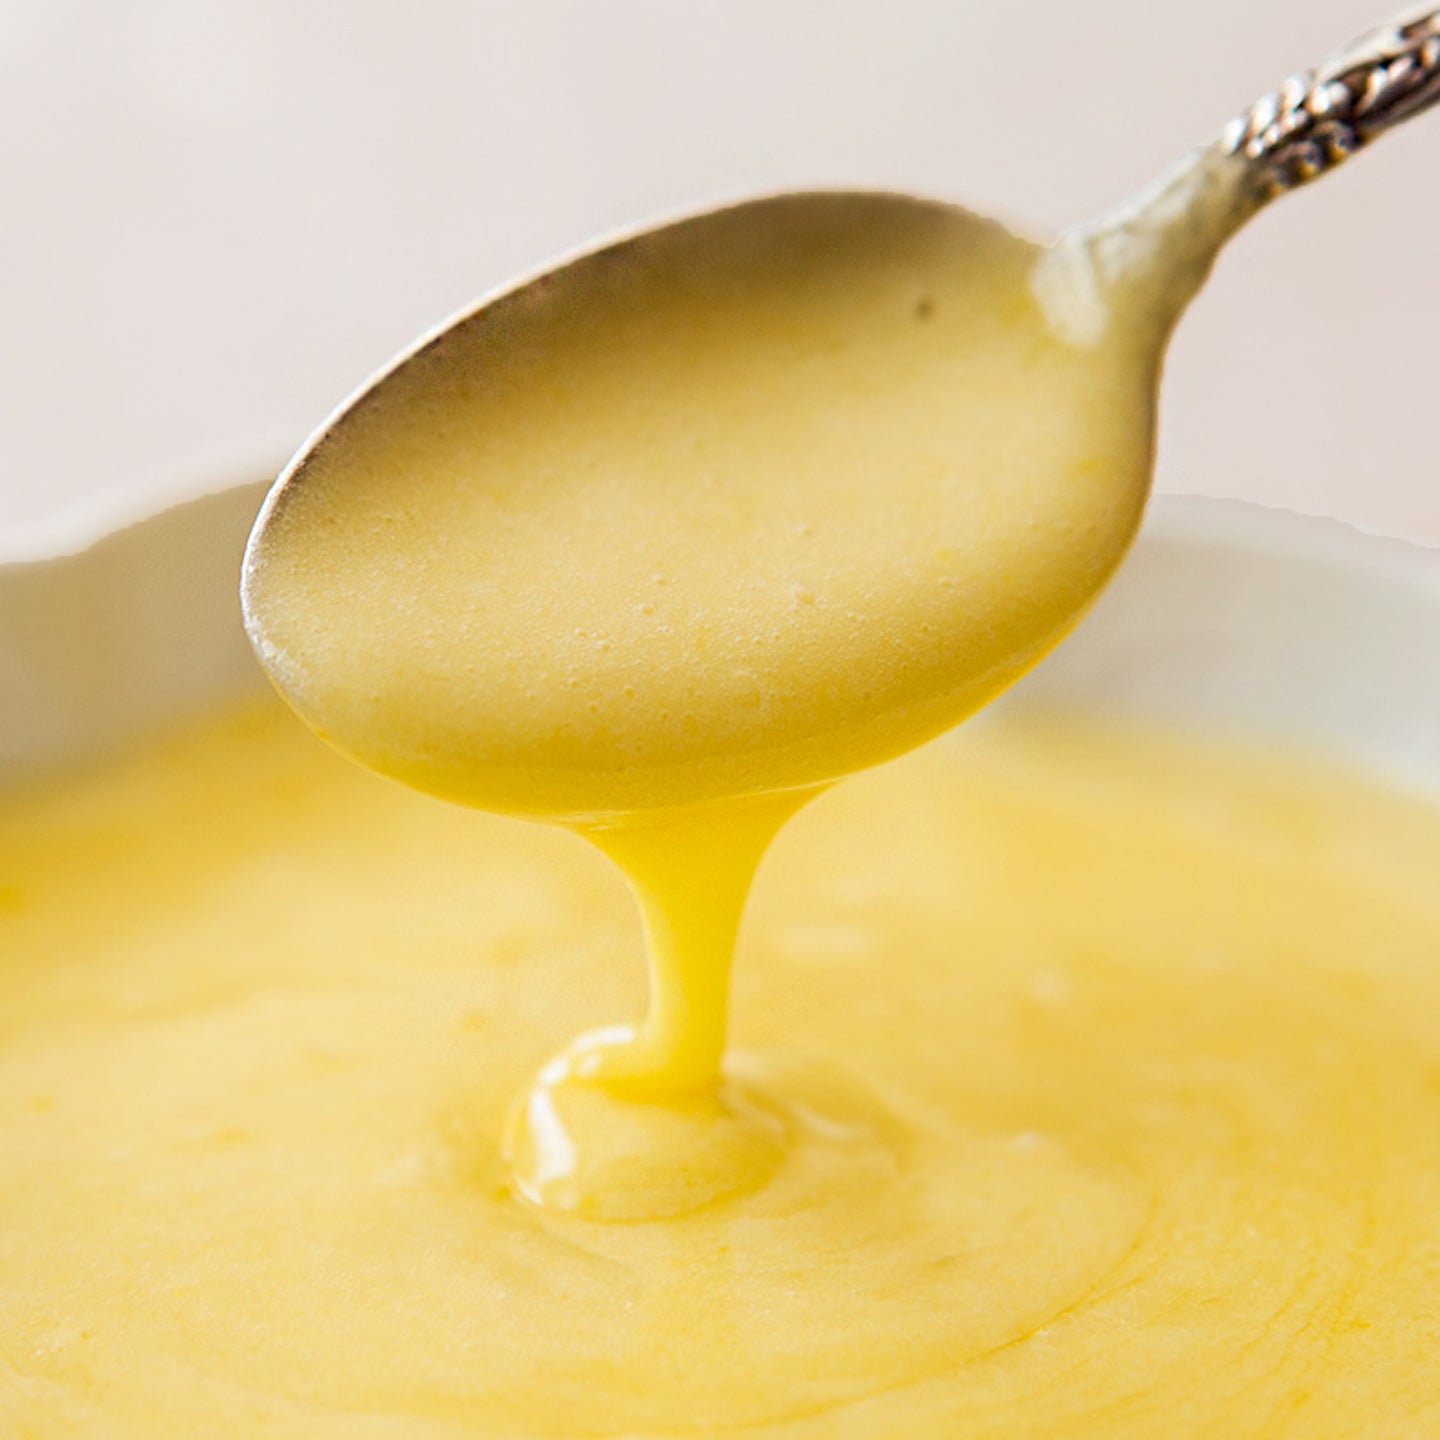 Mastering Classic Sauces, Stocks & Emulsions Cooking Class